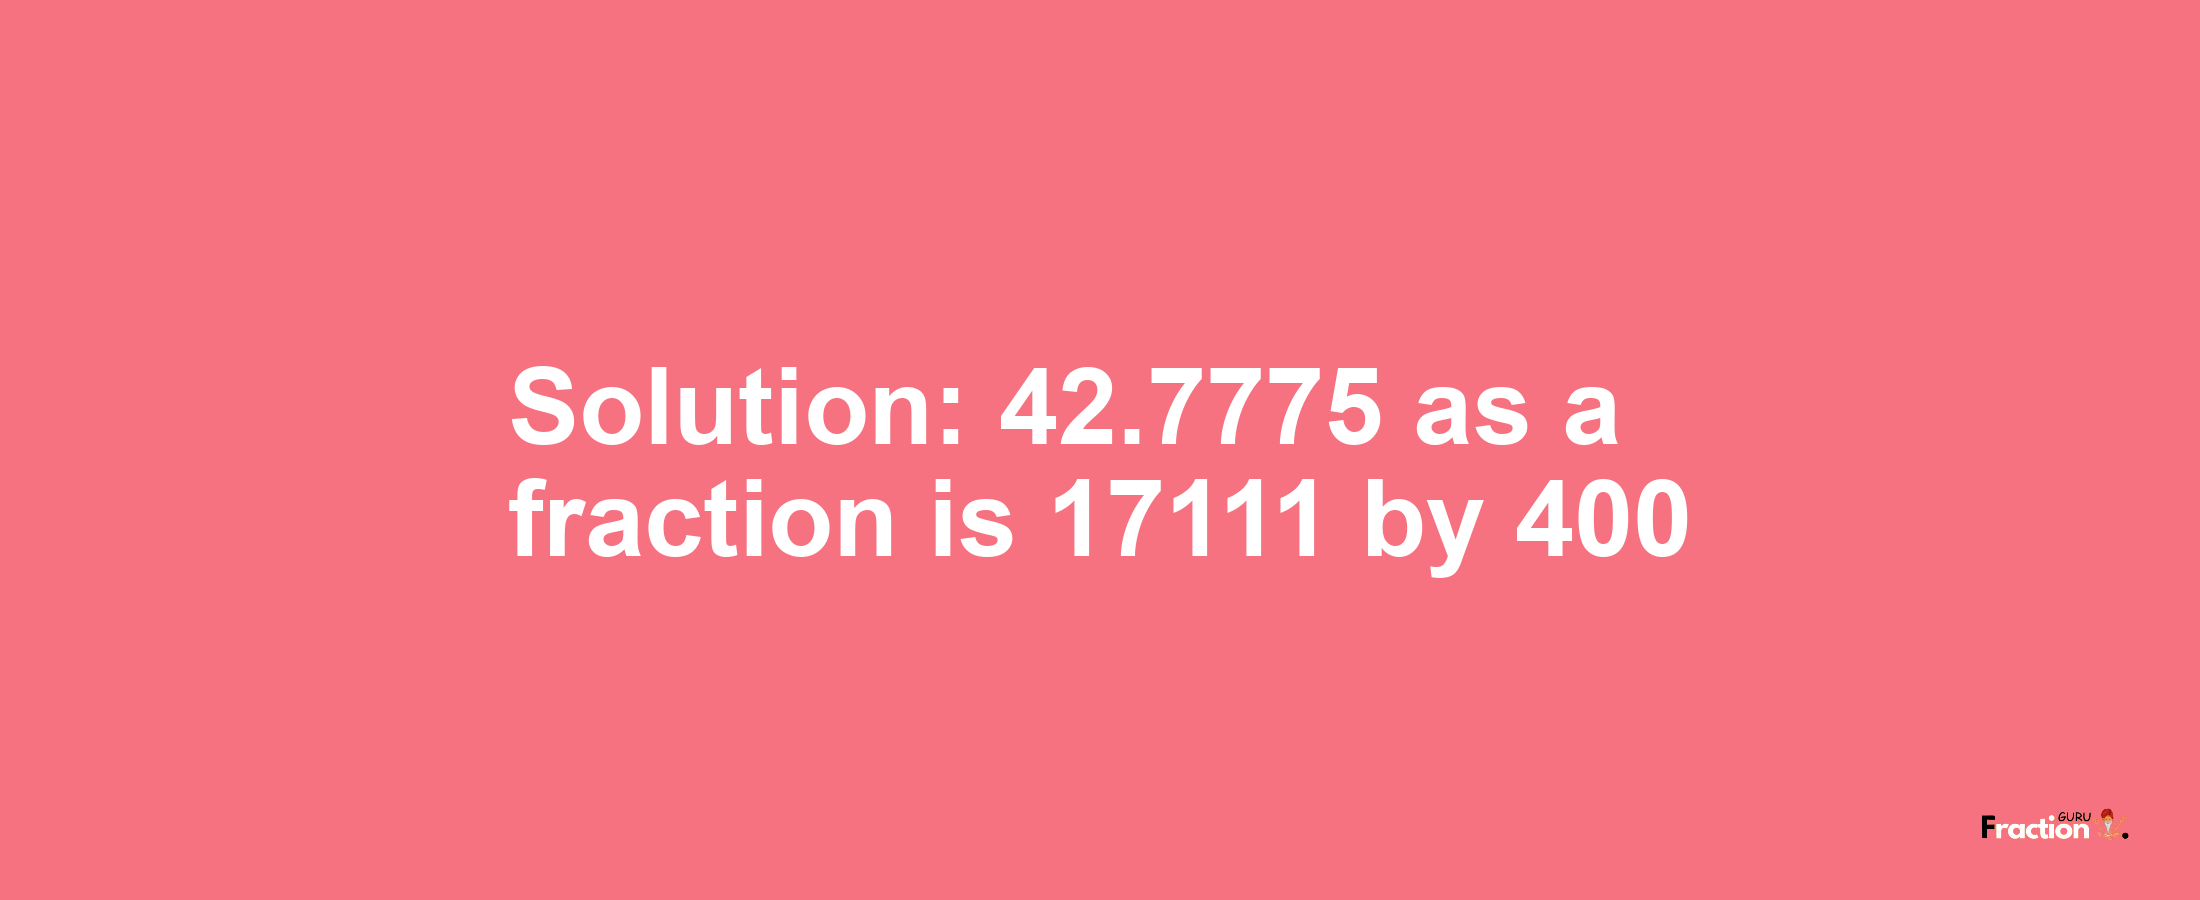 Solution:42.7775 as a fraction is 17111/400